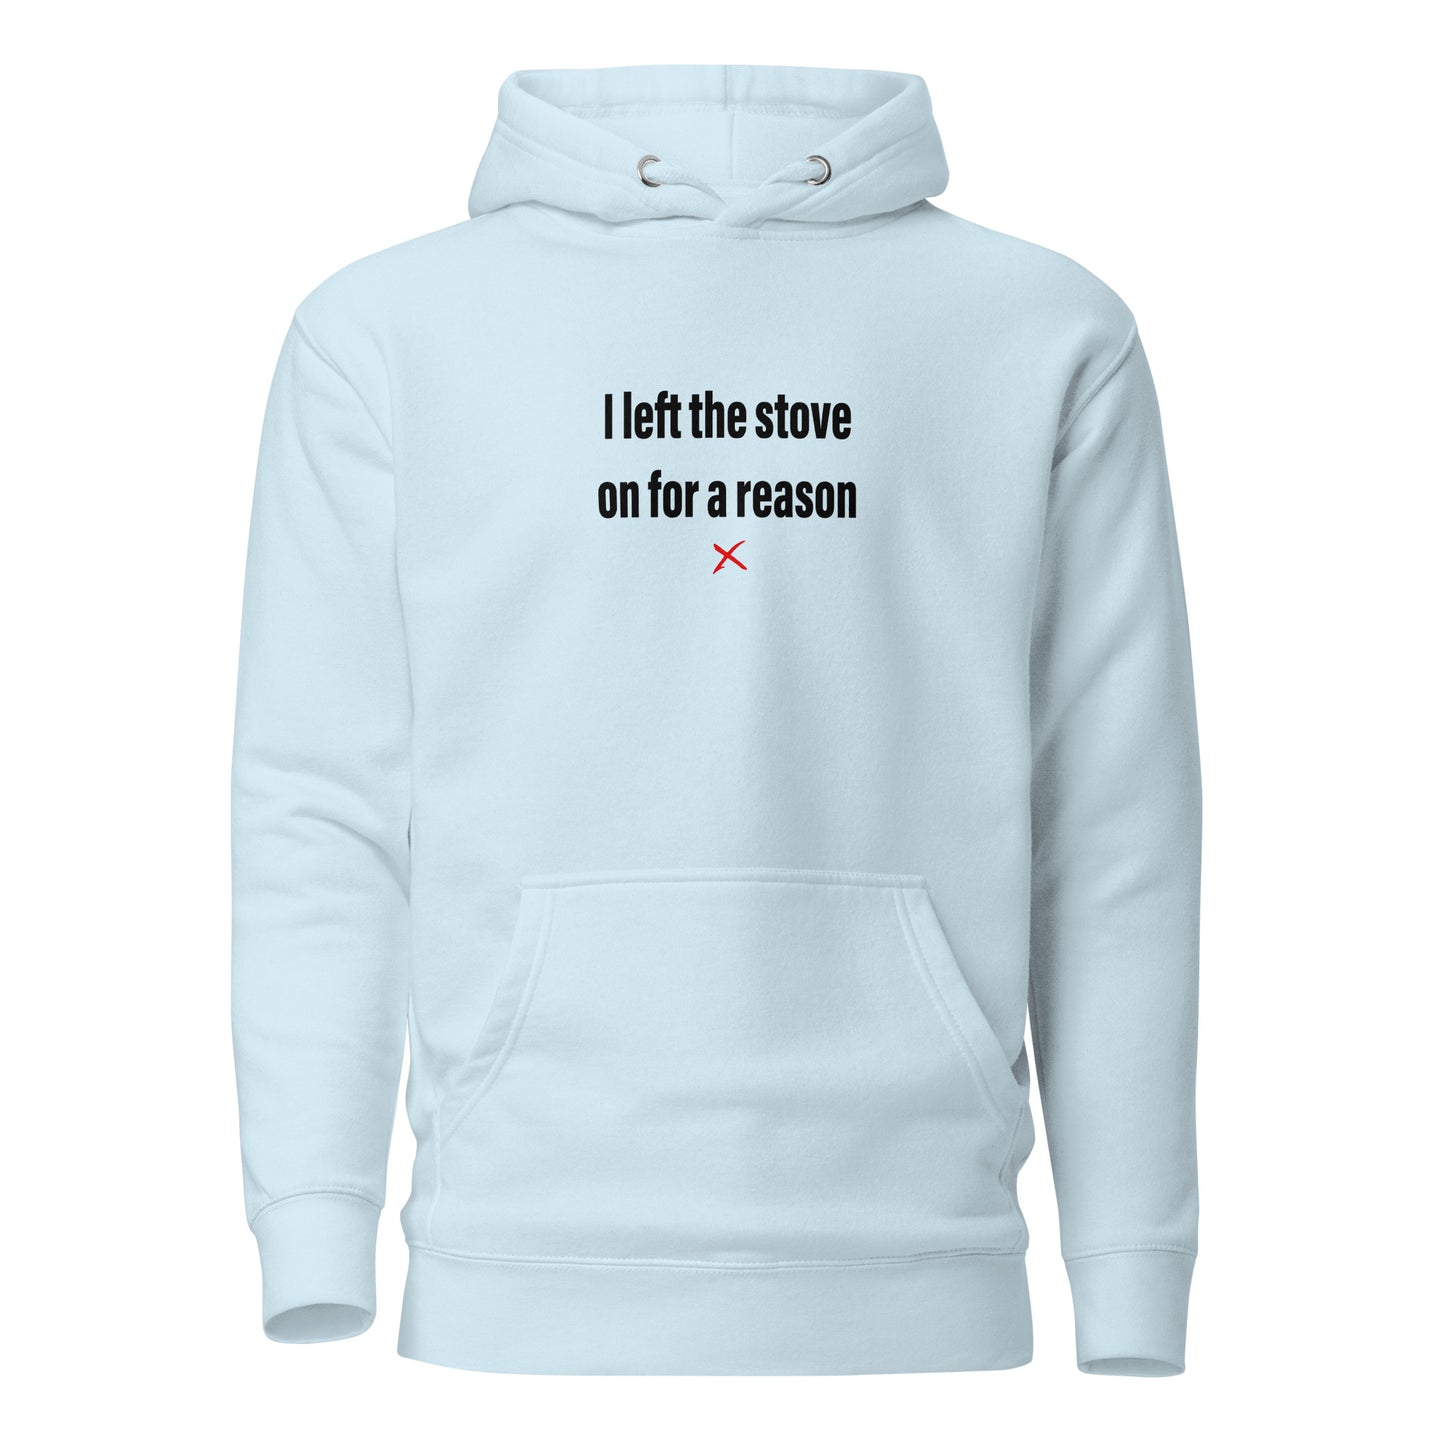 I left the stove on for a reason - Hoodie